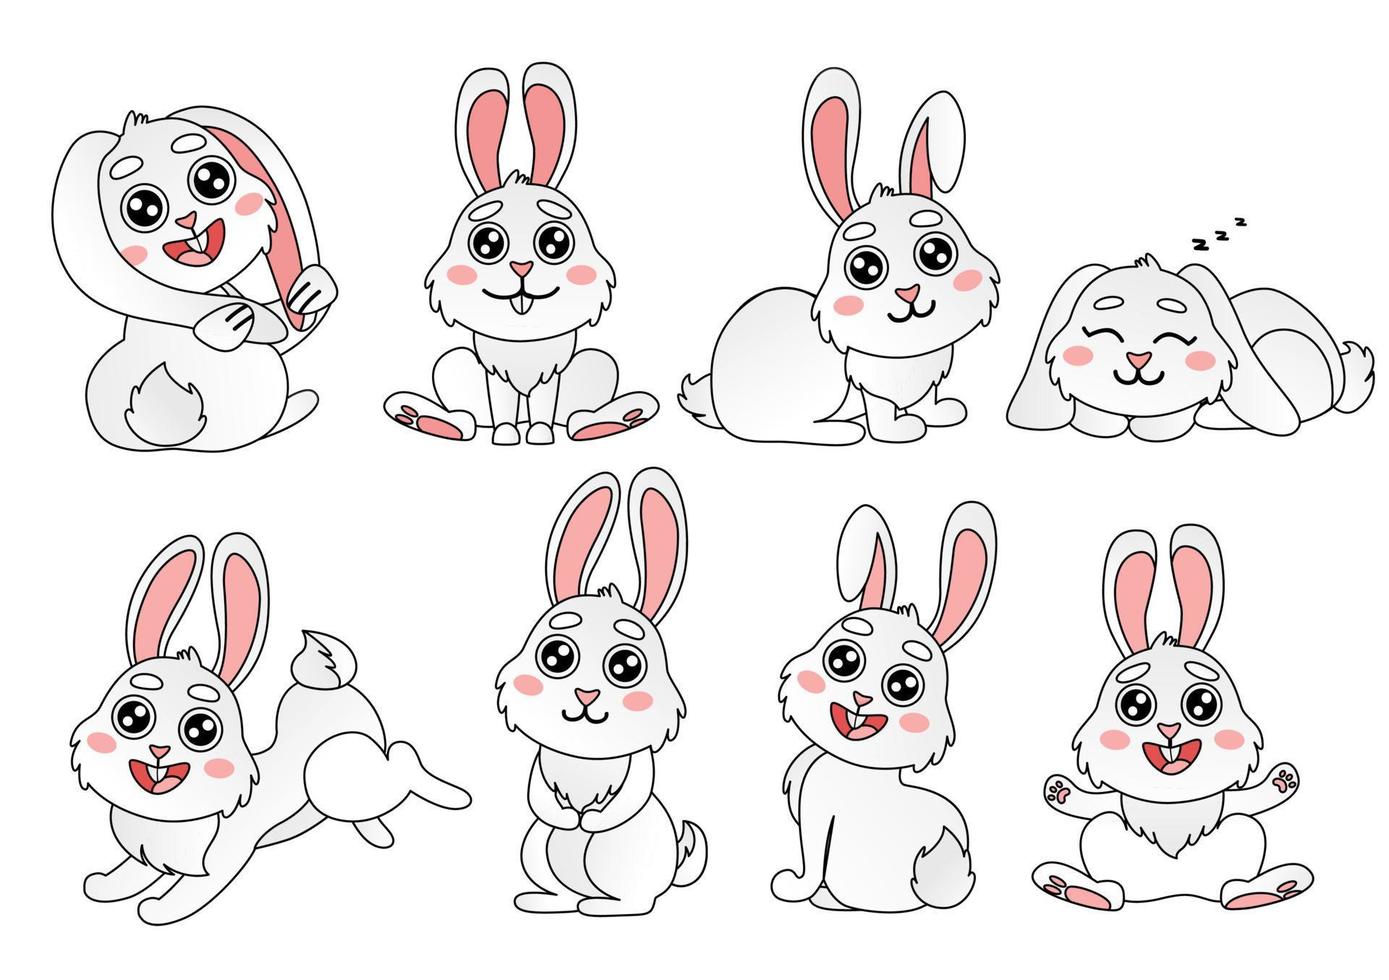 Cartoon set of cute bunnies. Banner with vector illustrations. Vector doodle bunny is sitting, jumping, greeting in cute poses. Animal wildlife cartoon